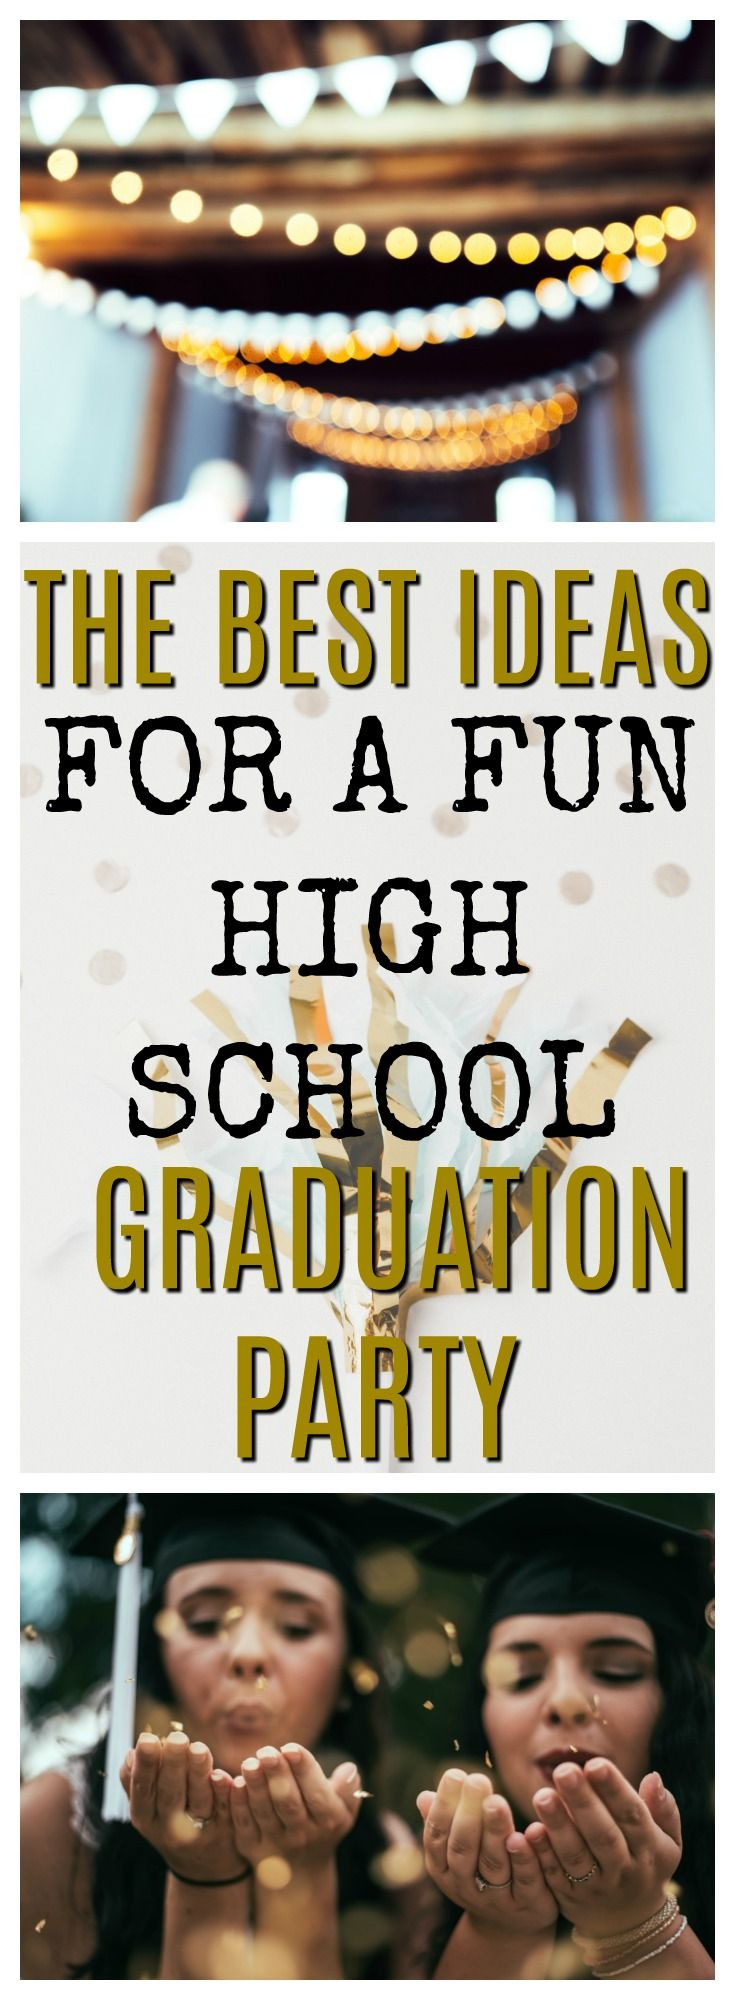 High School Graduation Party Games Ideas
 Graduation Party Ideas 2020 How to Celebrate [step by